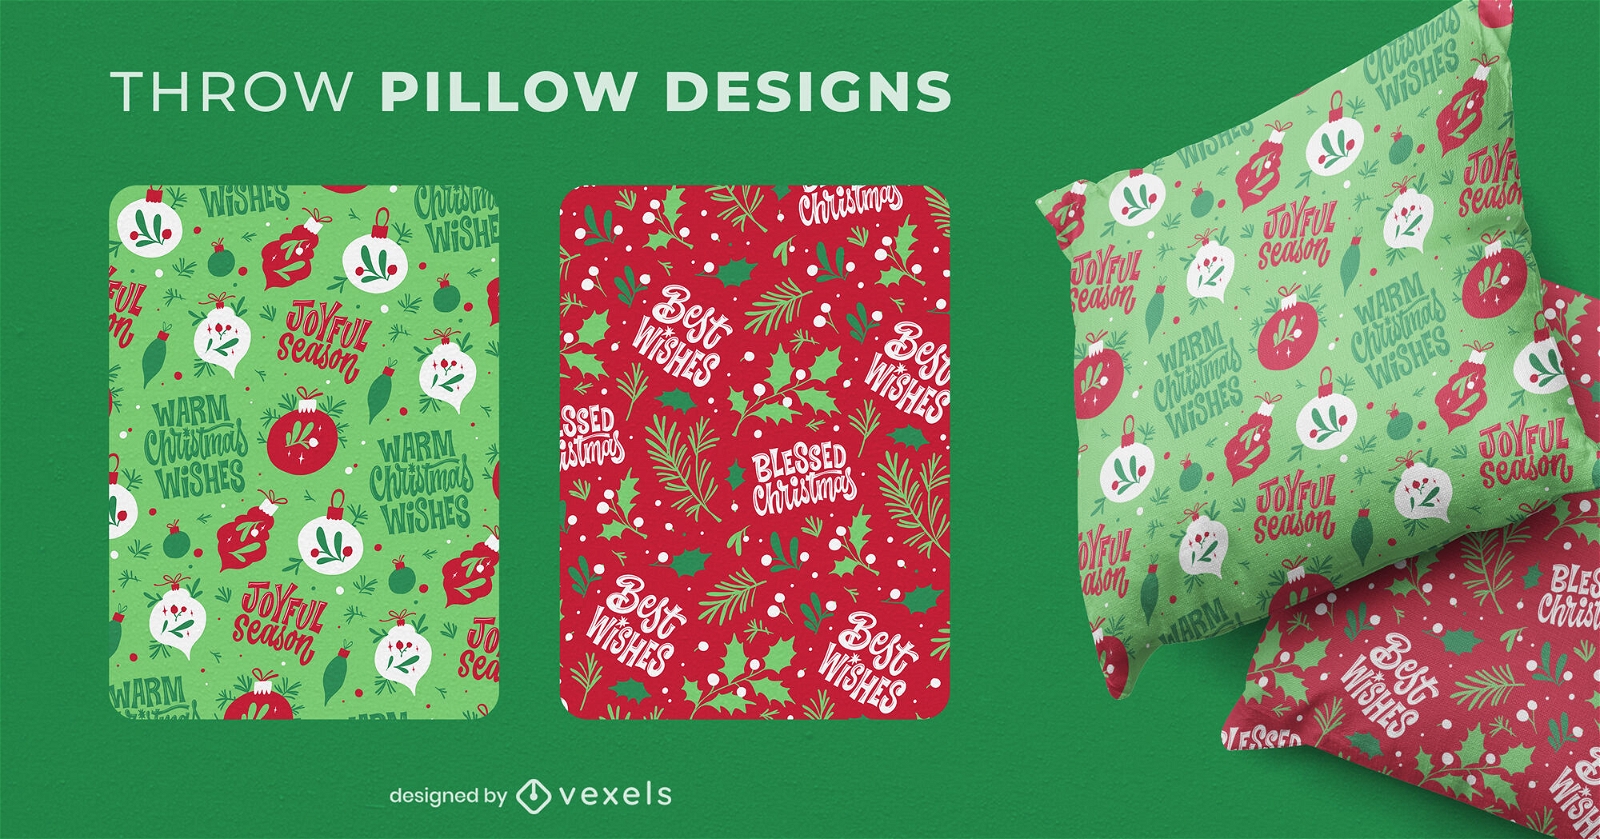 Traditional Christmas patterns throw pillow designs